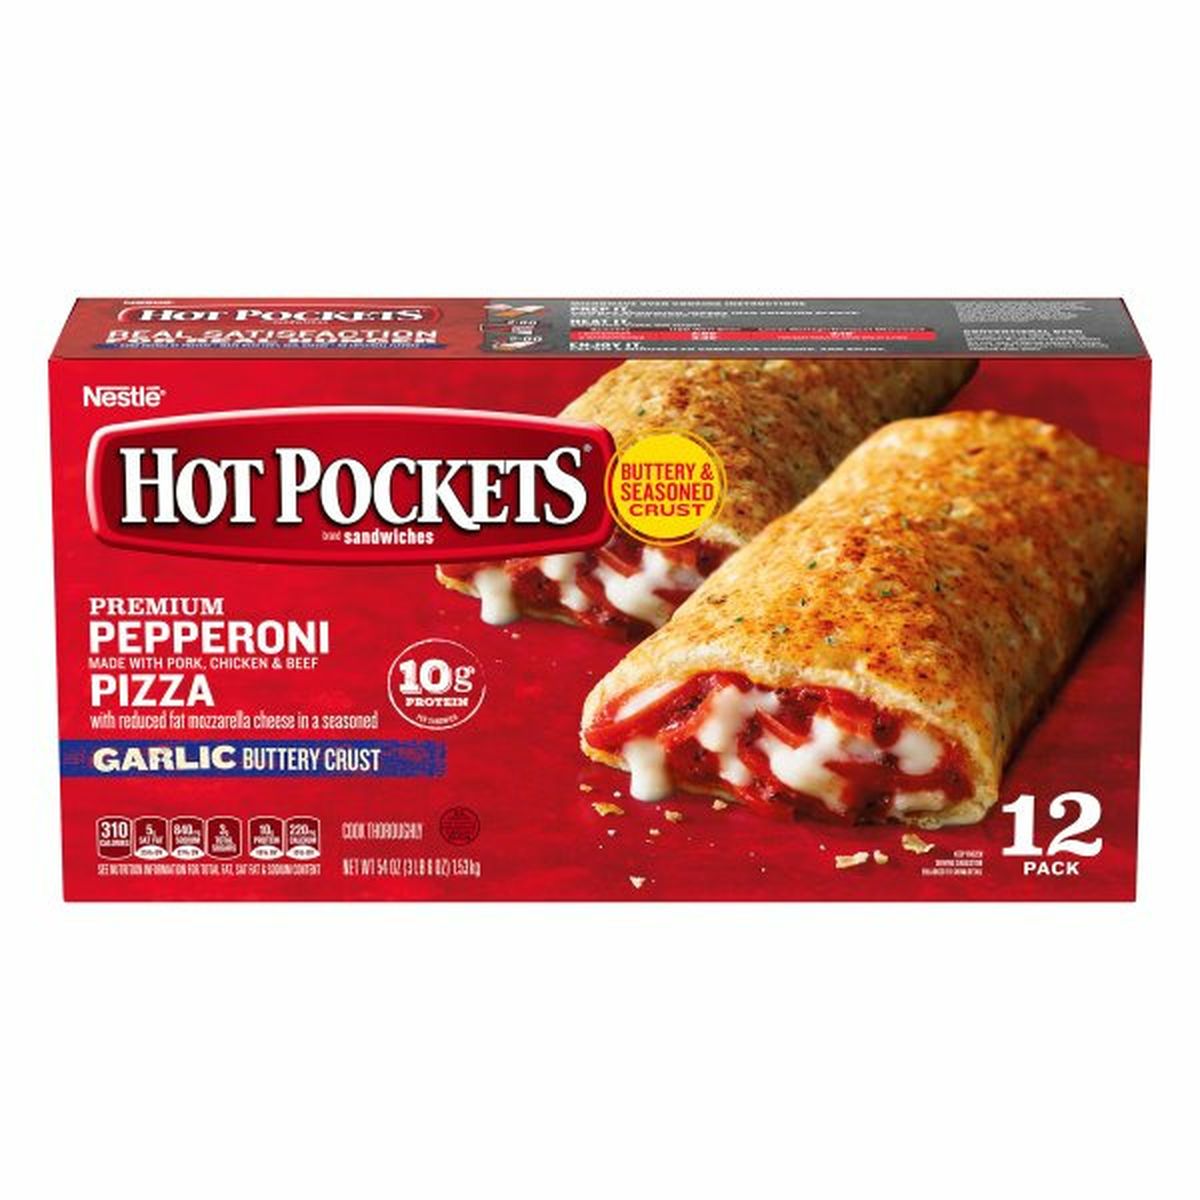 Calories in Hot Pockets Sandwiches, Premium Pepperoni, Pizza, Garlic Buttery Crust